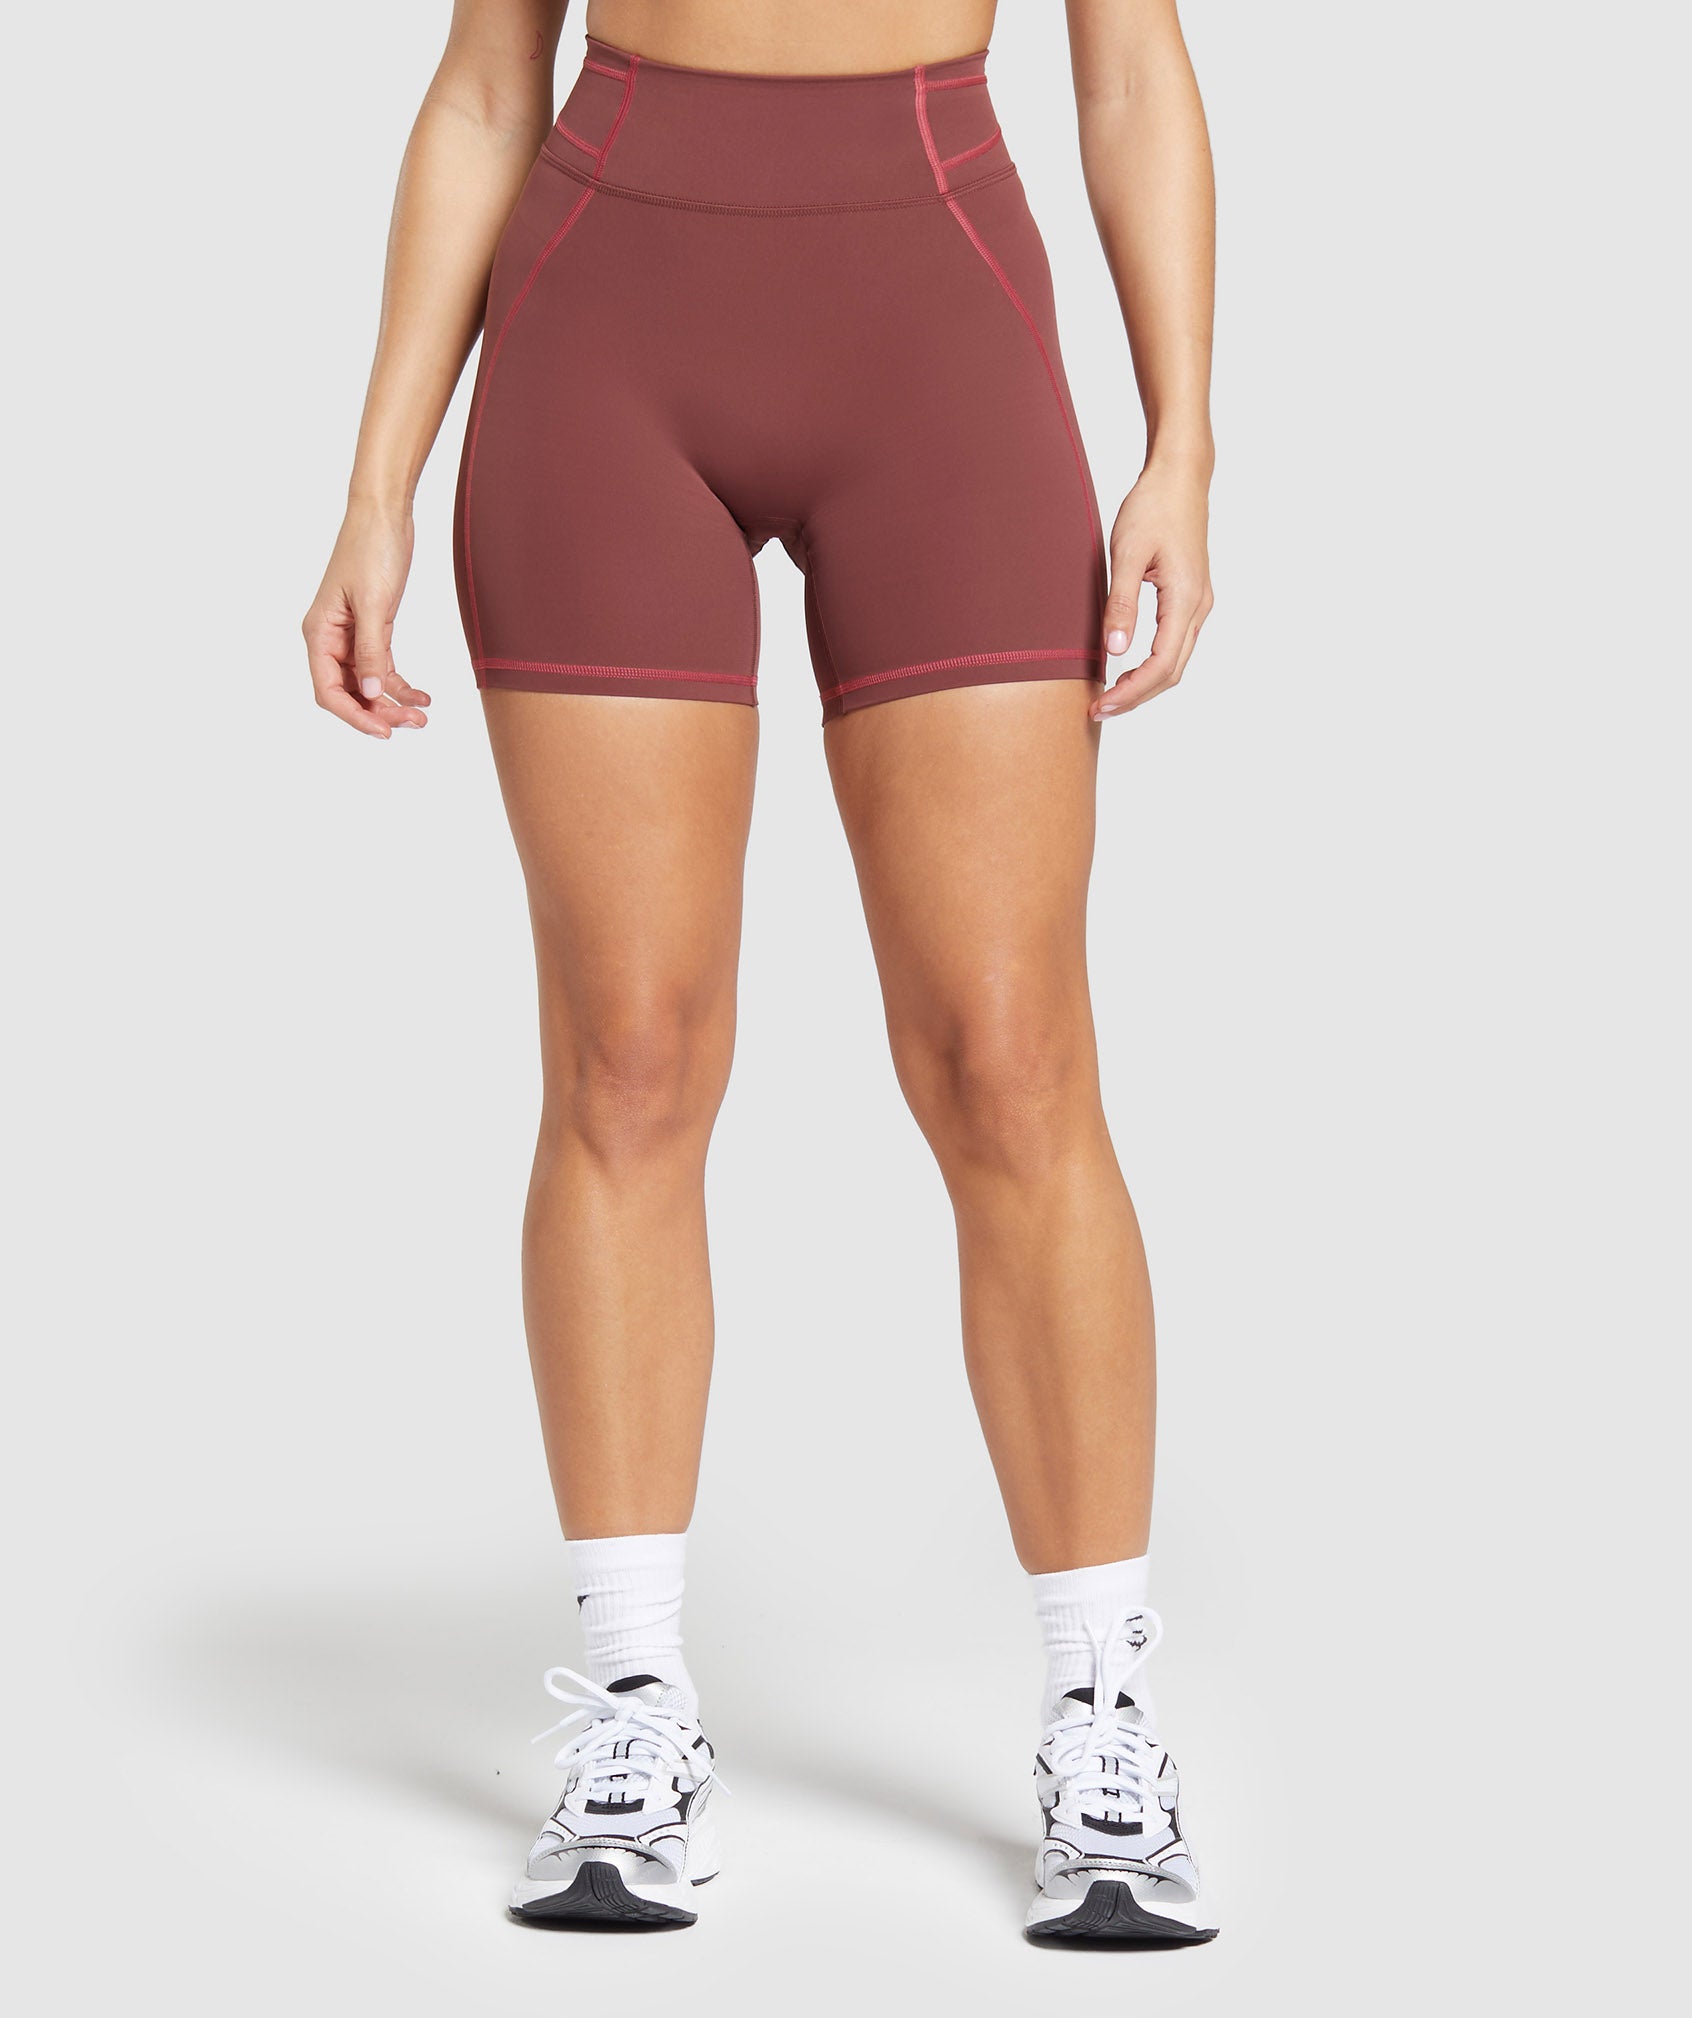 Stitch Feature Shorts in Burgundy Brown - view 1